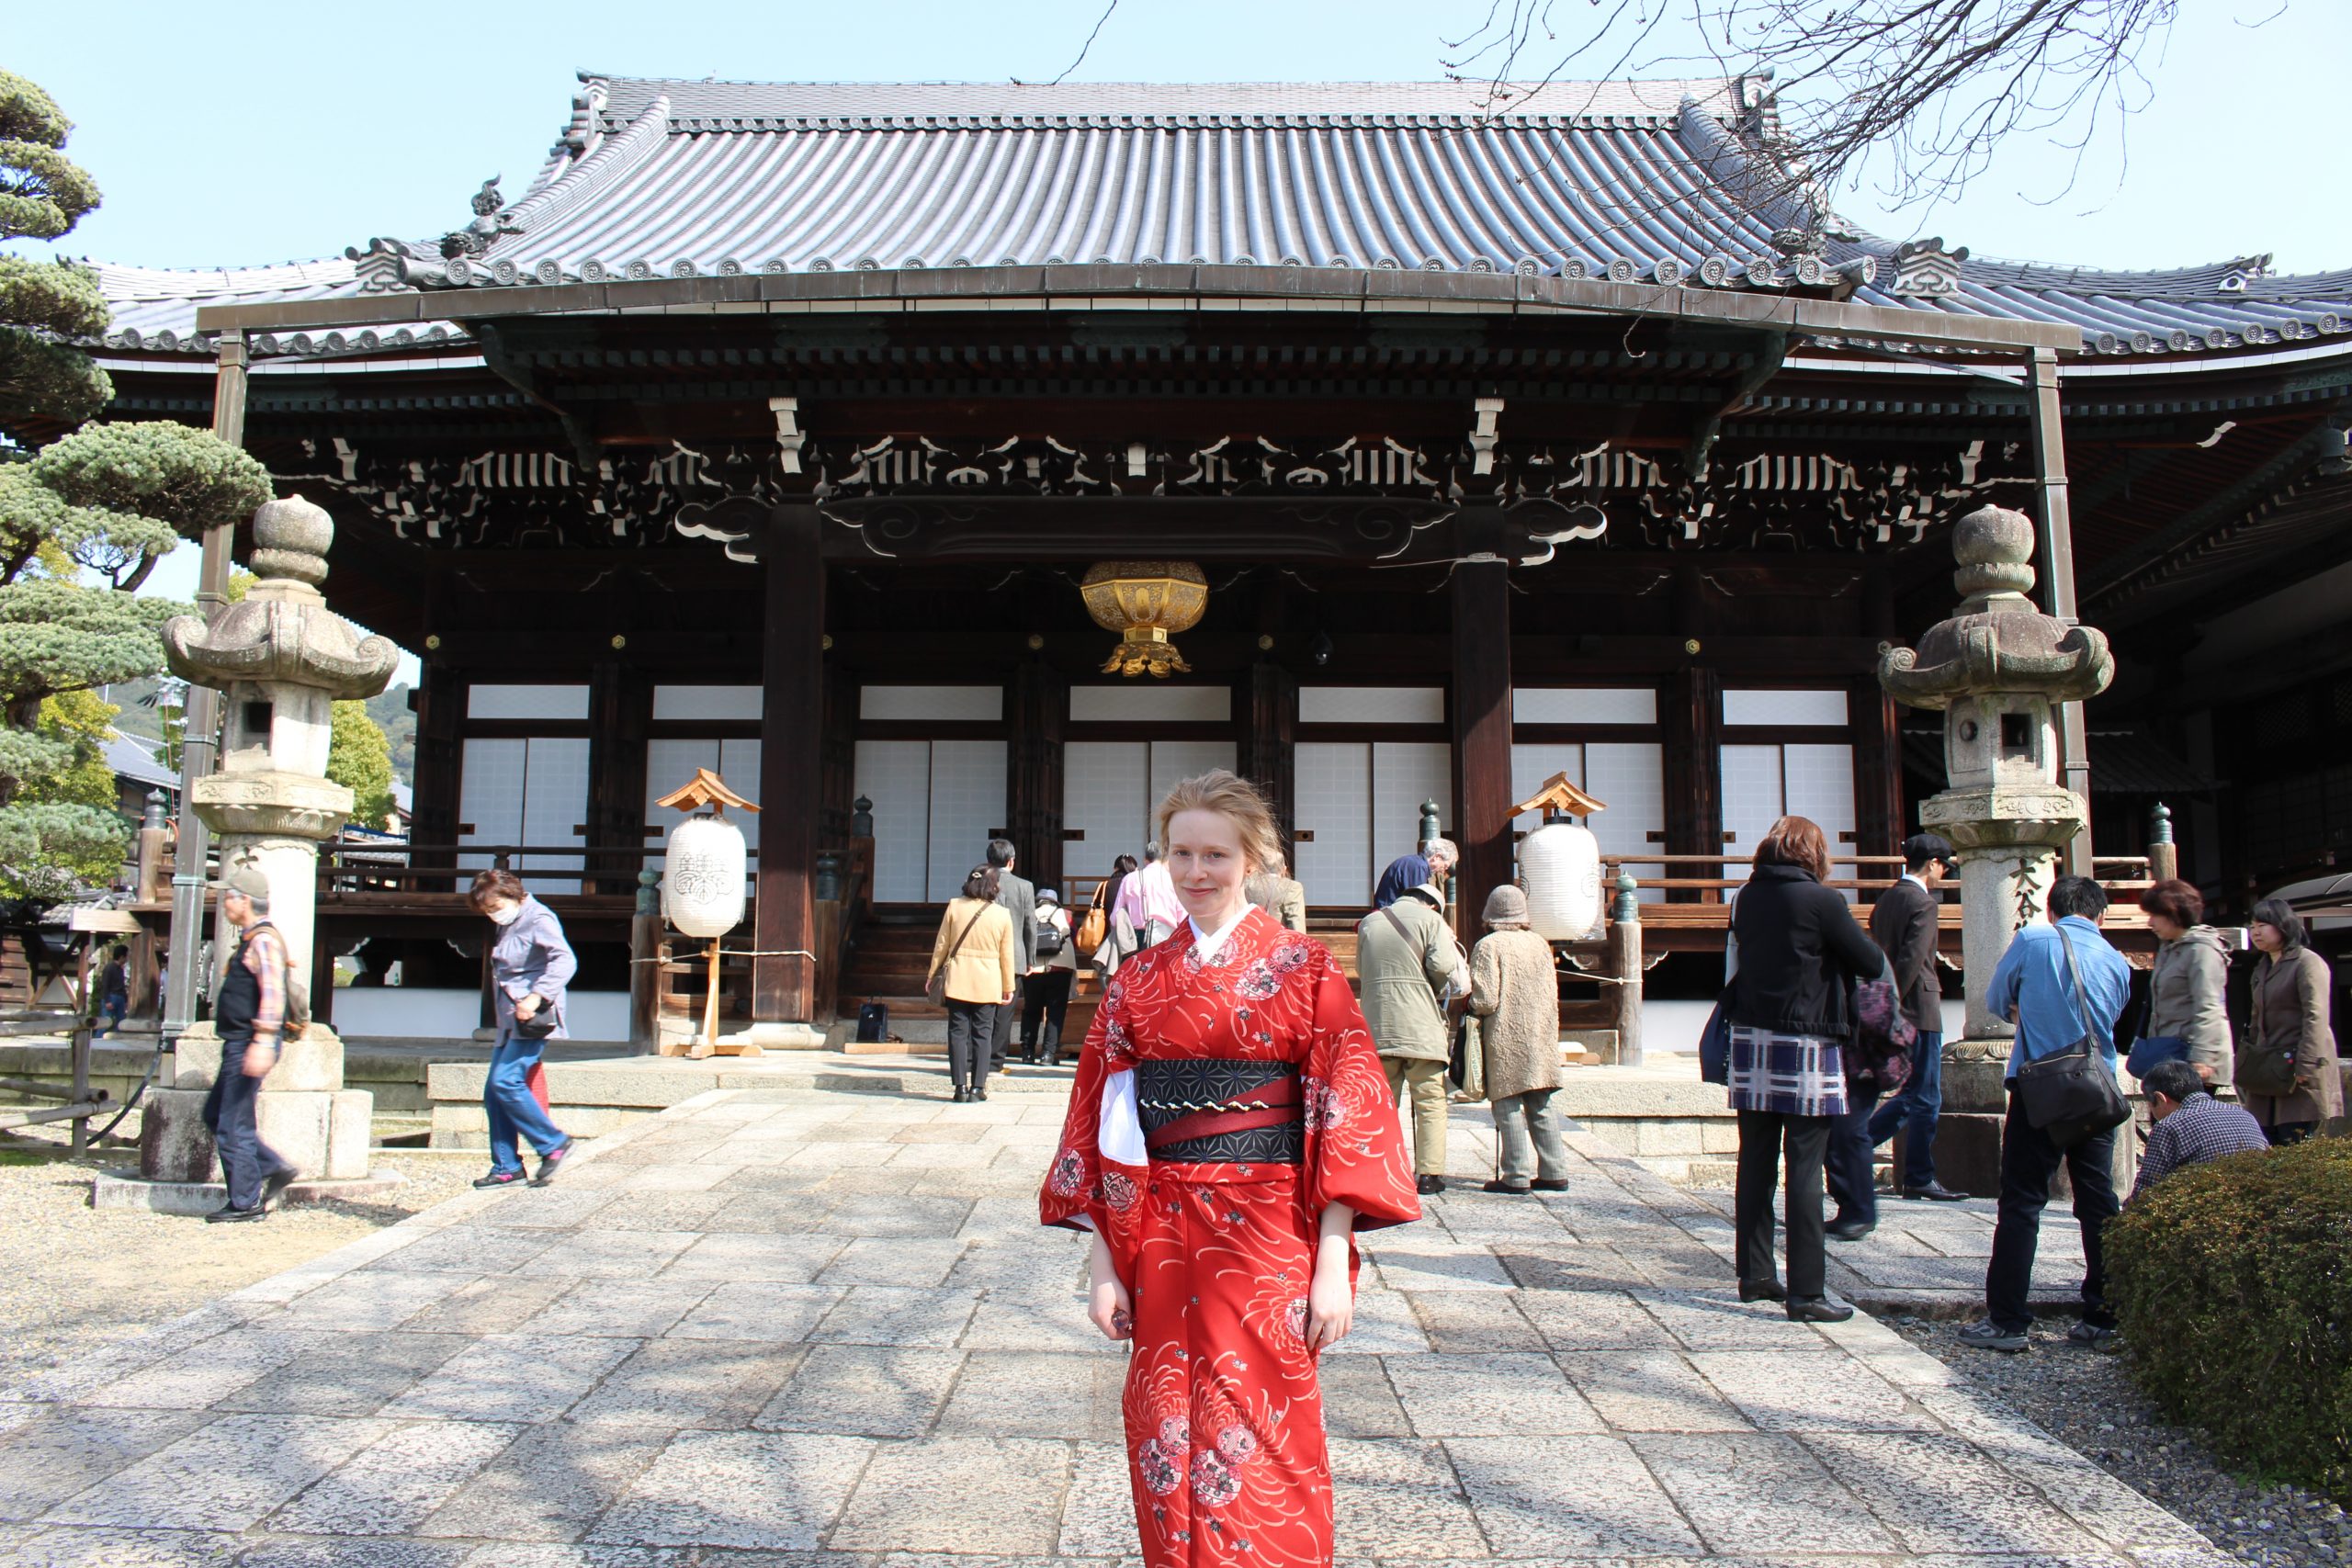 Elizabeth Norris – student placement at the Nagoya Institute of Technology in Japan